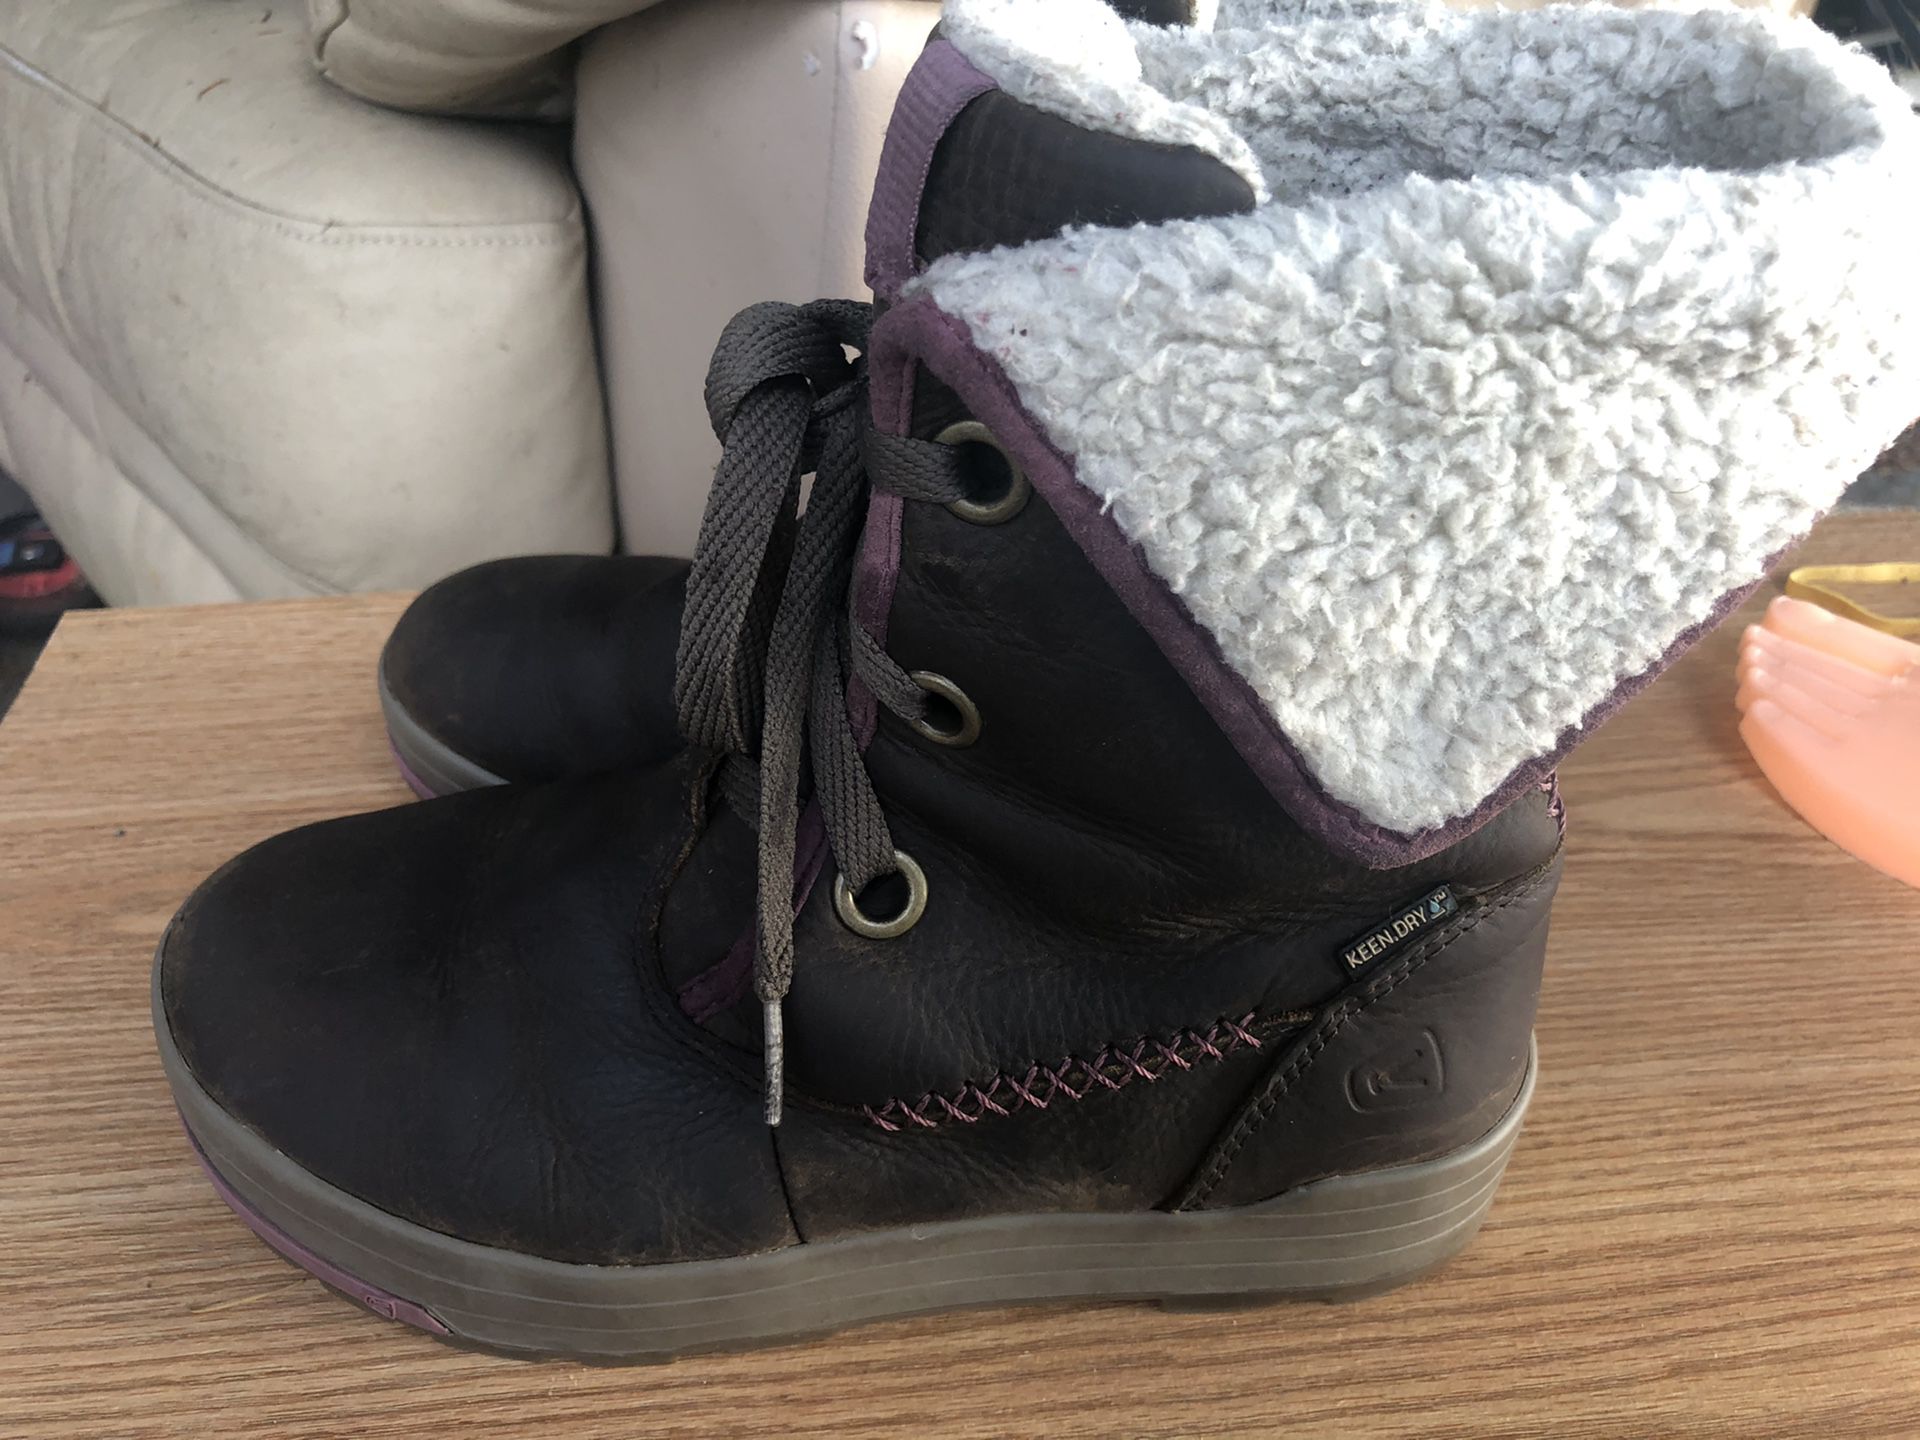 Keen Dry 53015-BRGN Women’s Gray/Brown Suede Leather Faux Fur Winter Boots Size 7.5